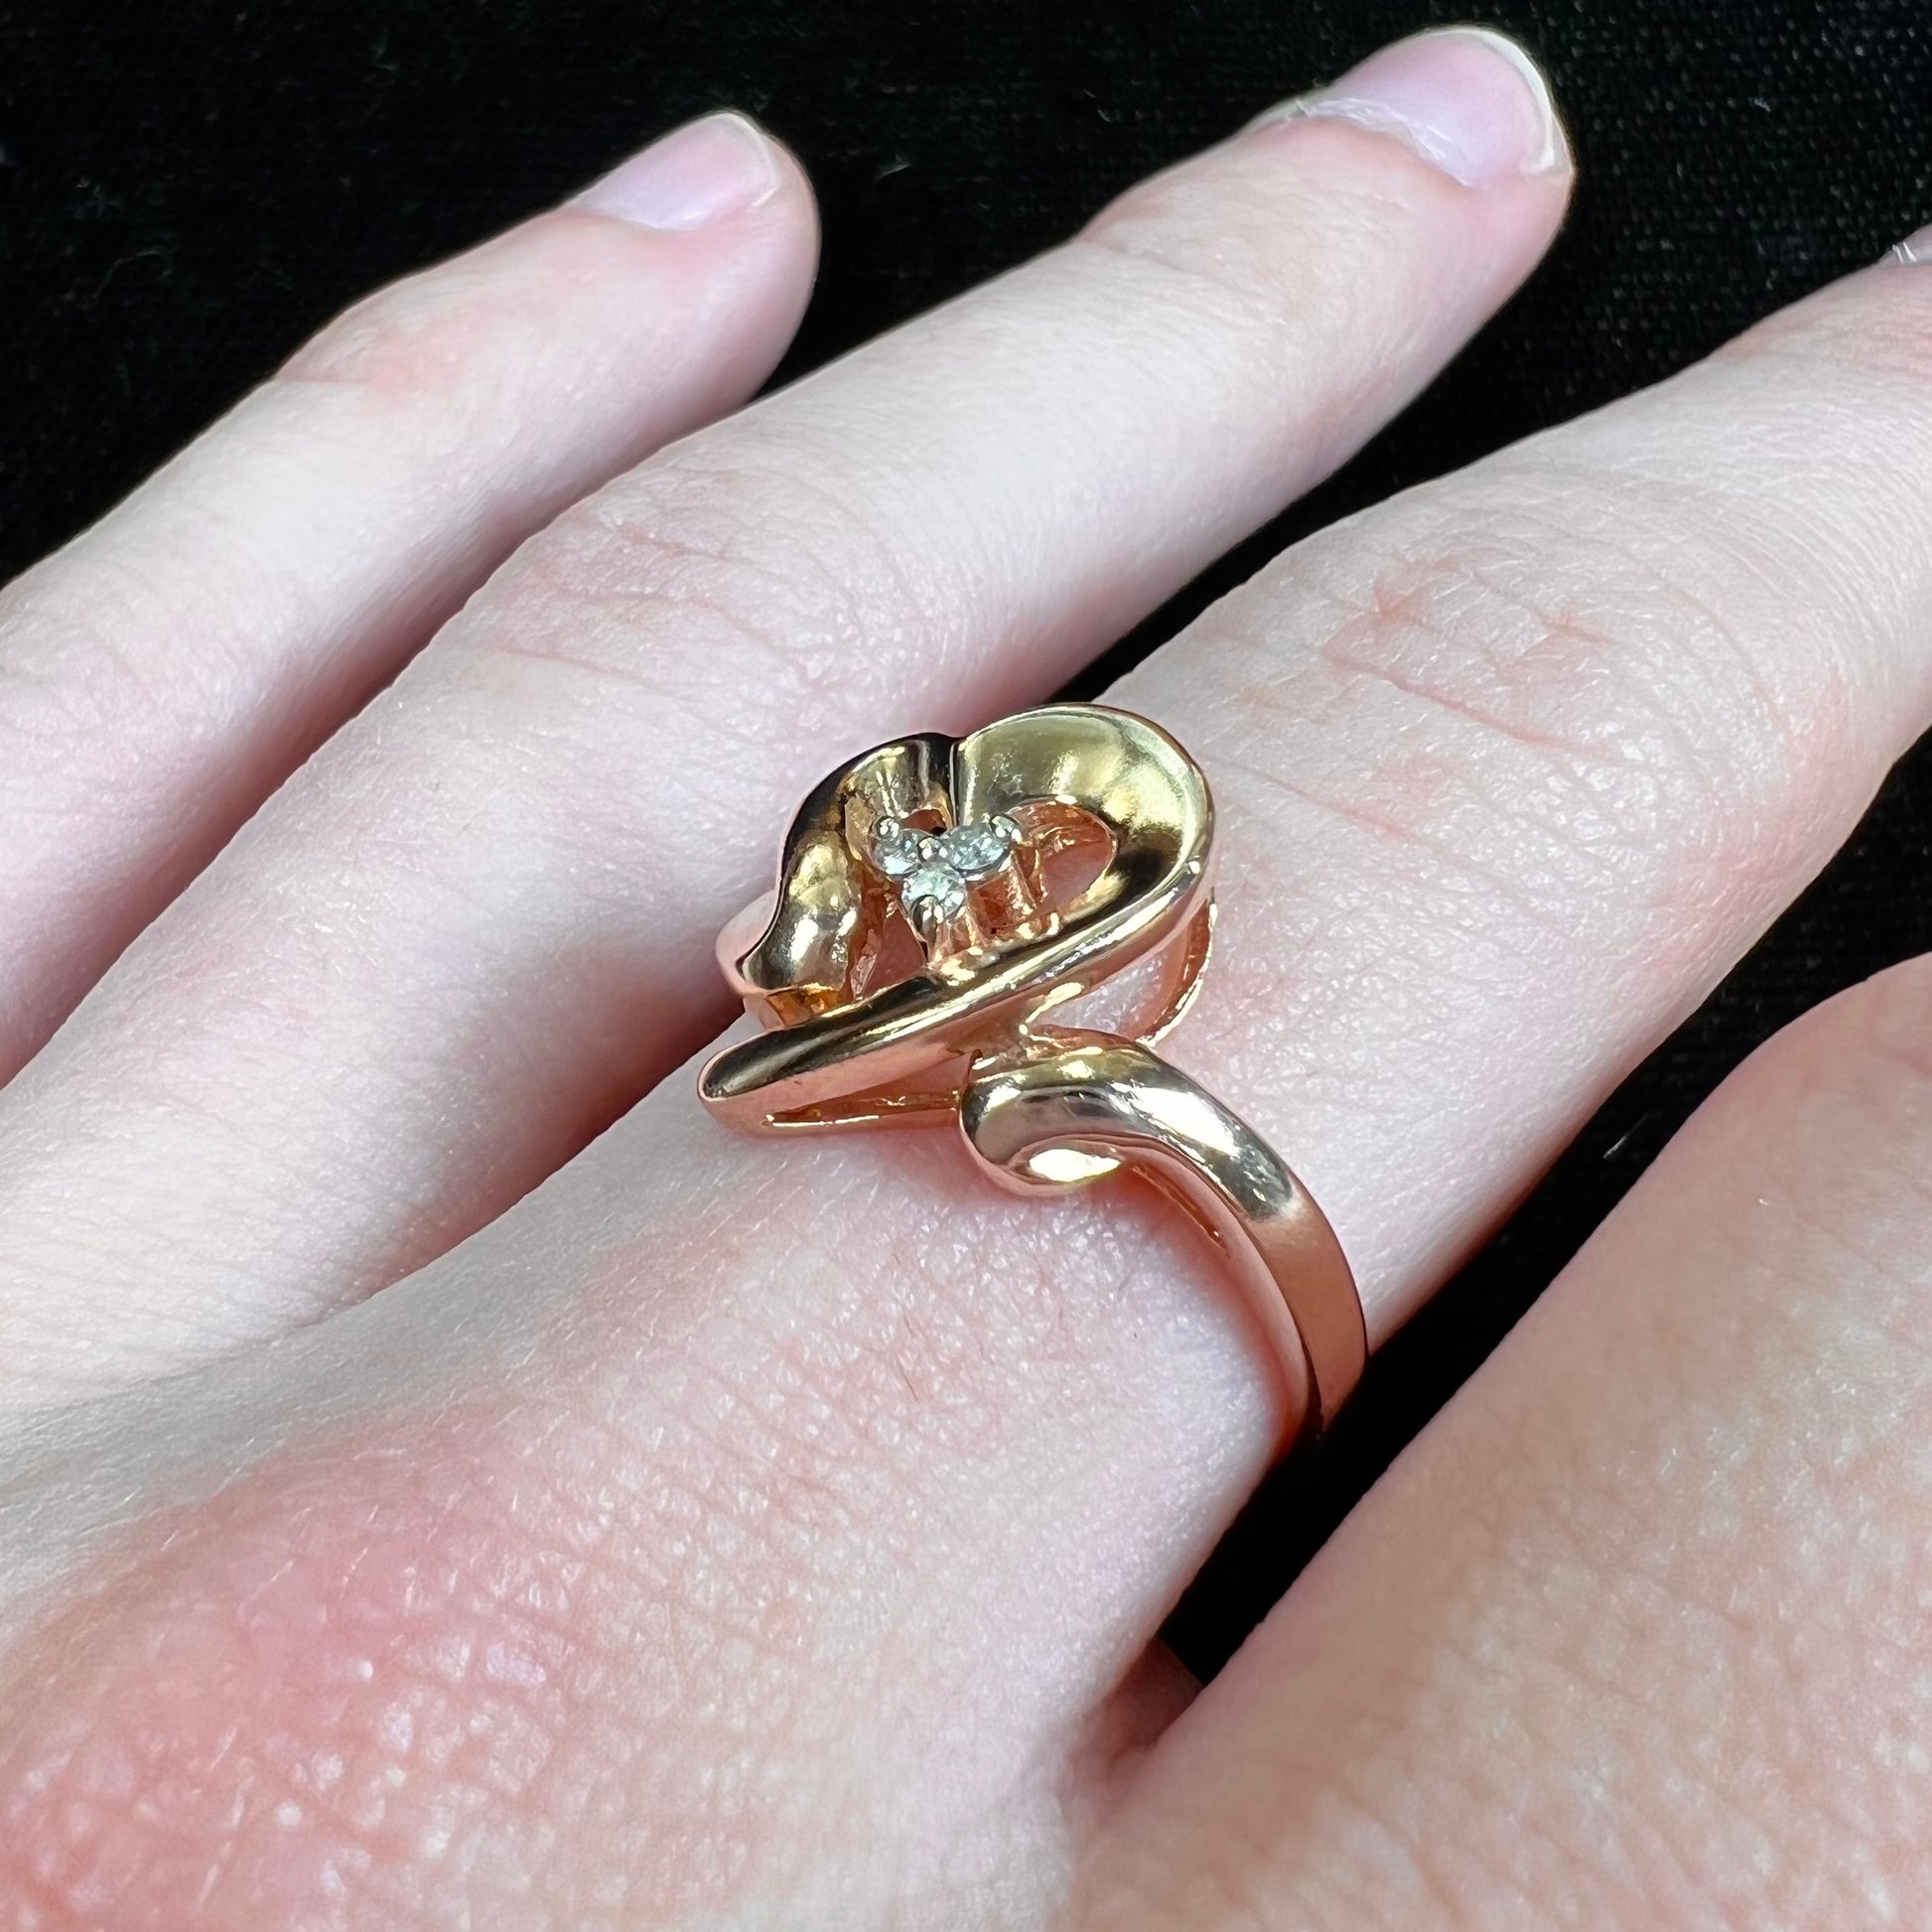 A rose gold heart ring set with three round cut diamonds.